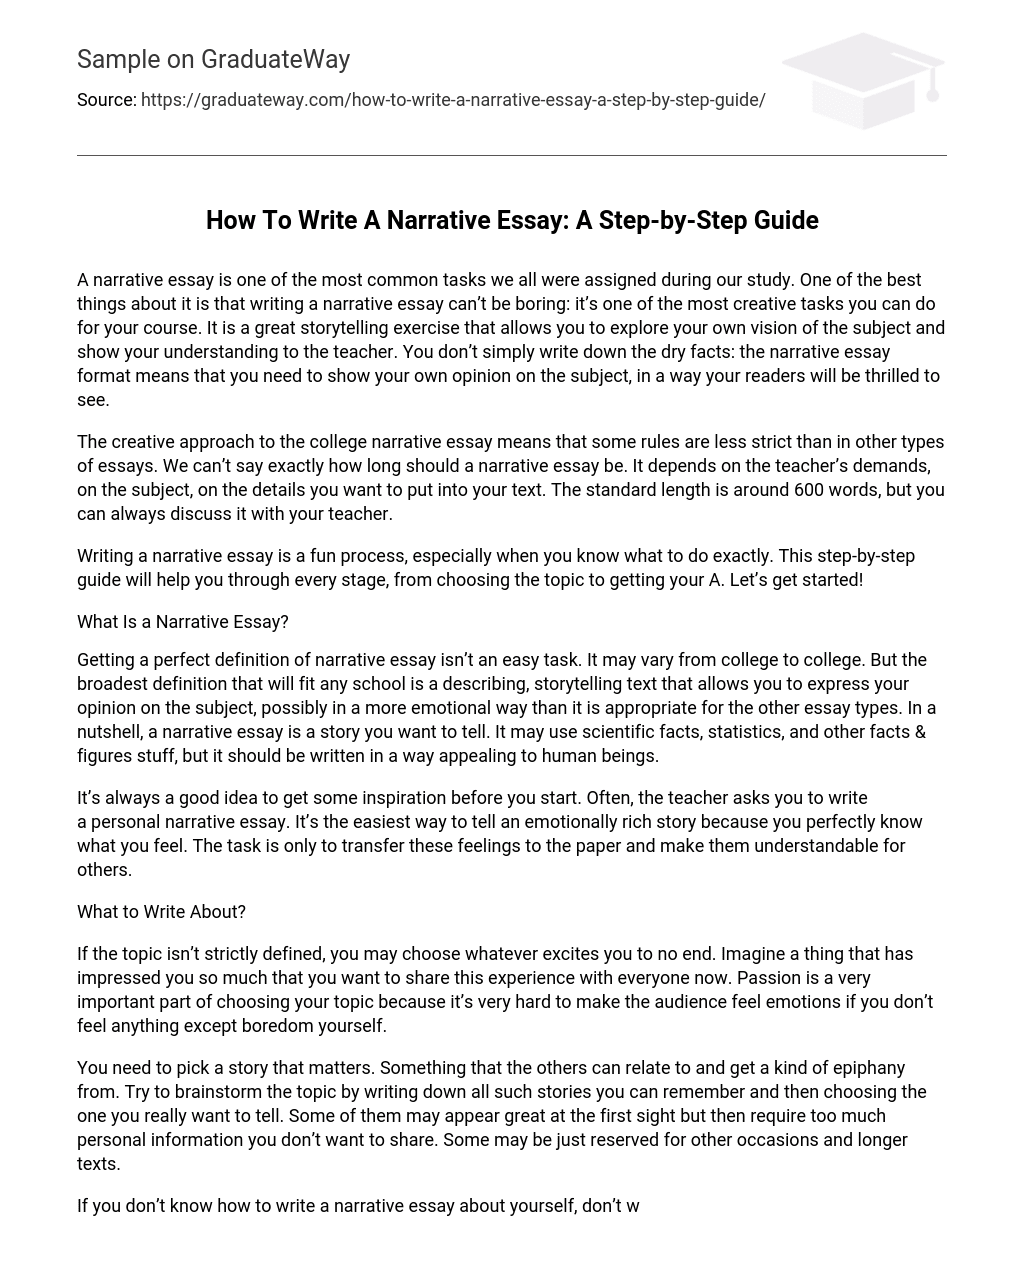 How To Write A Narrative Essay: A Step-by-Step Guide